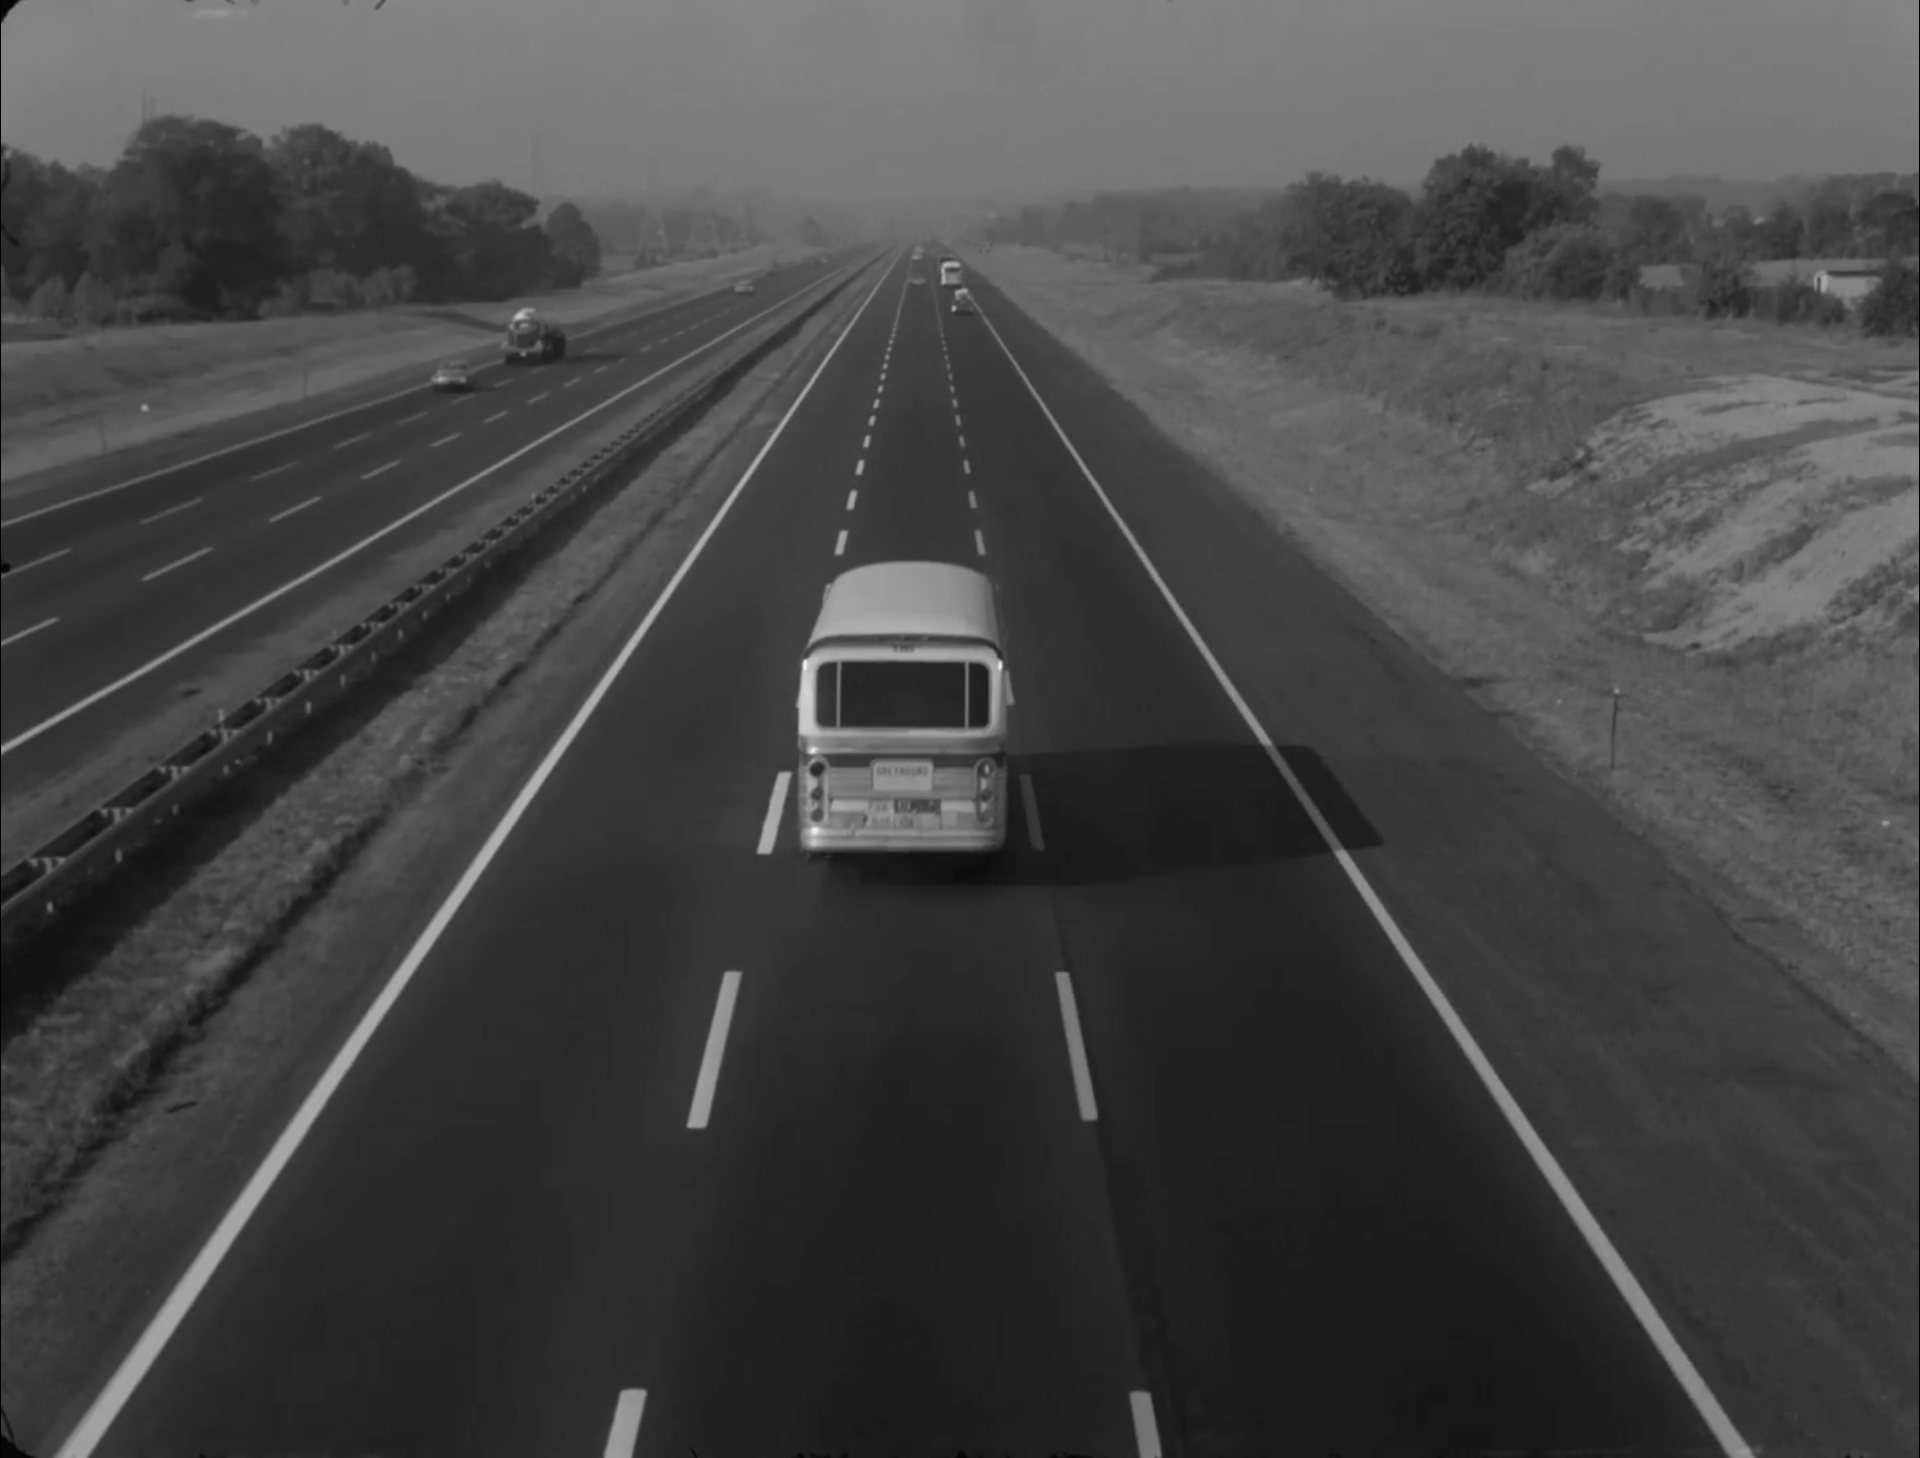 A bus drives on a highway.